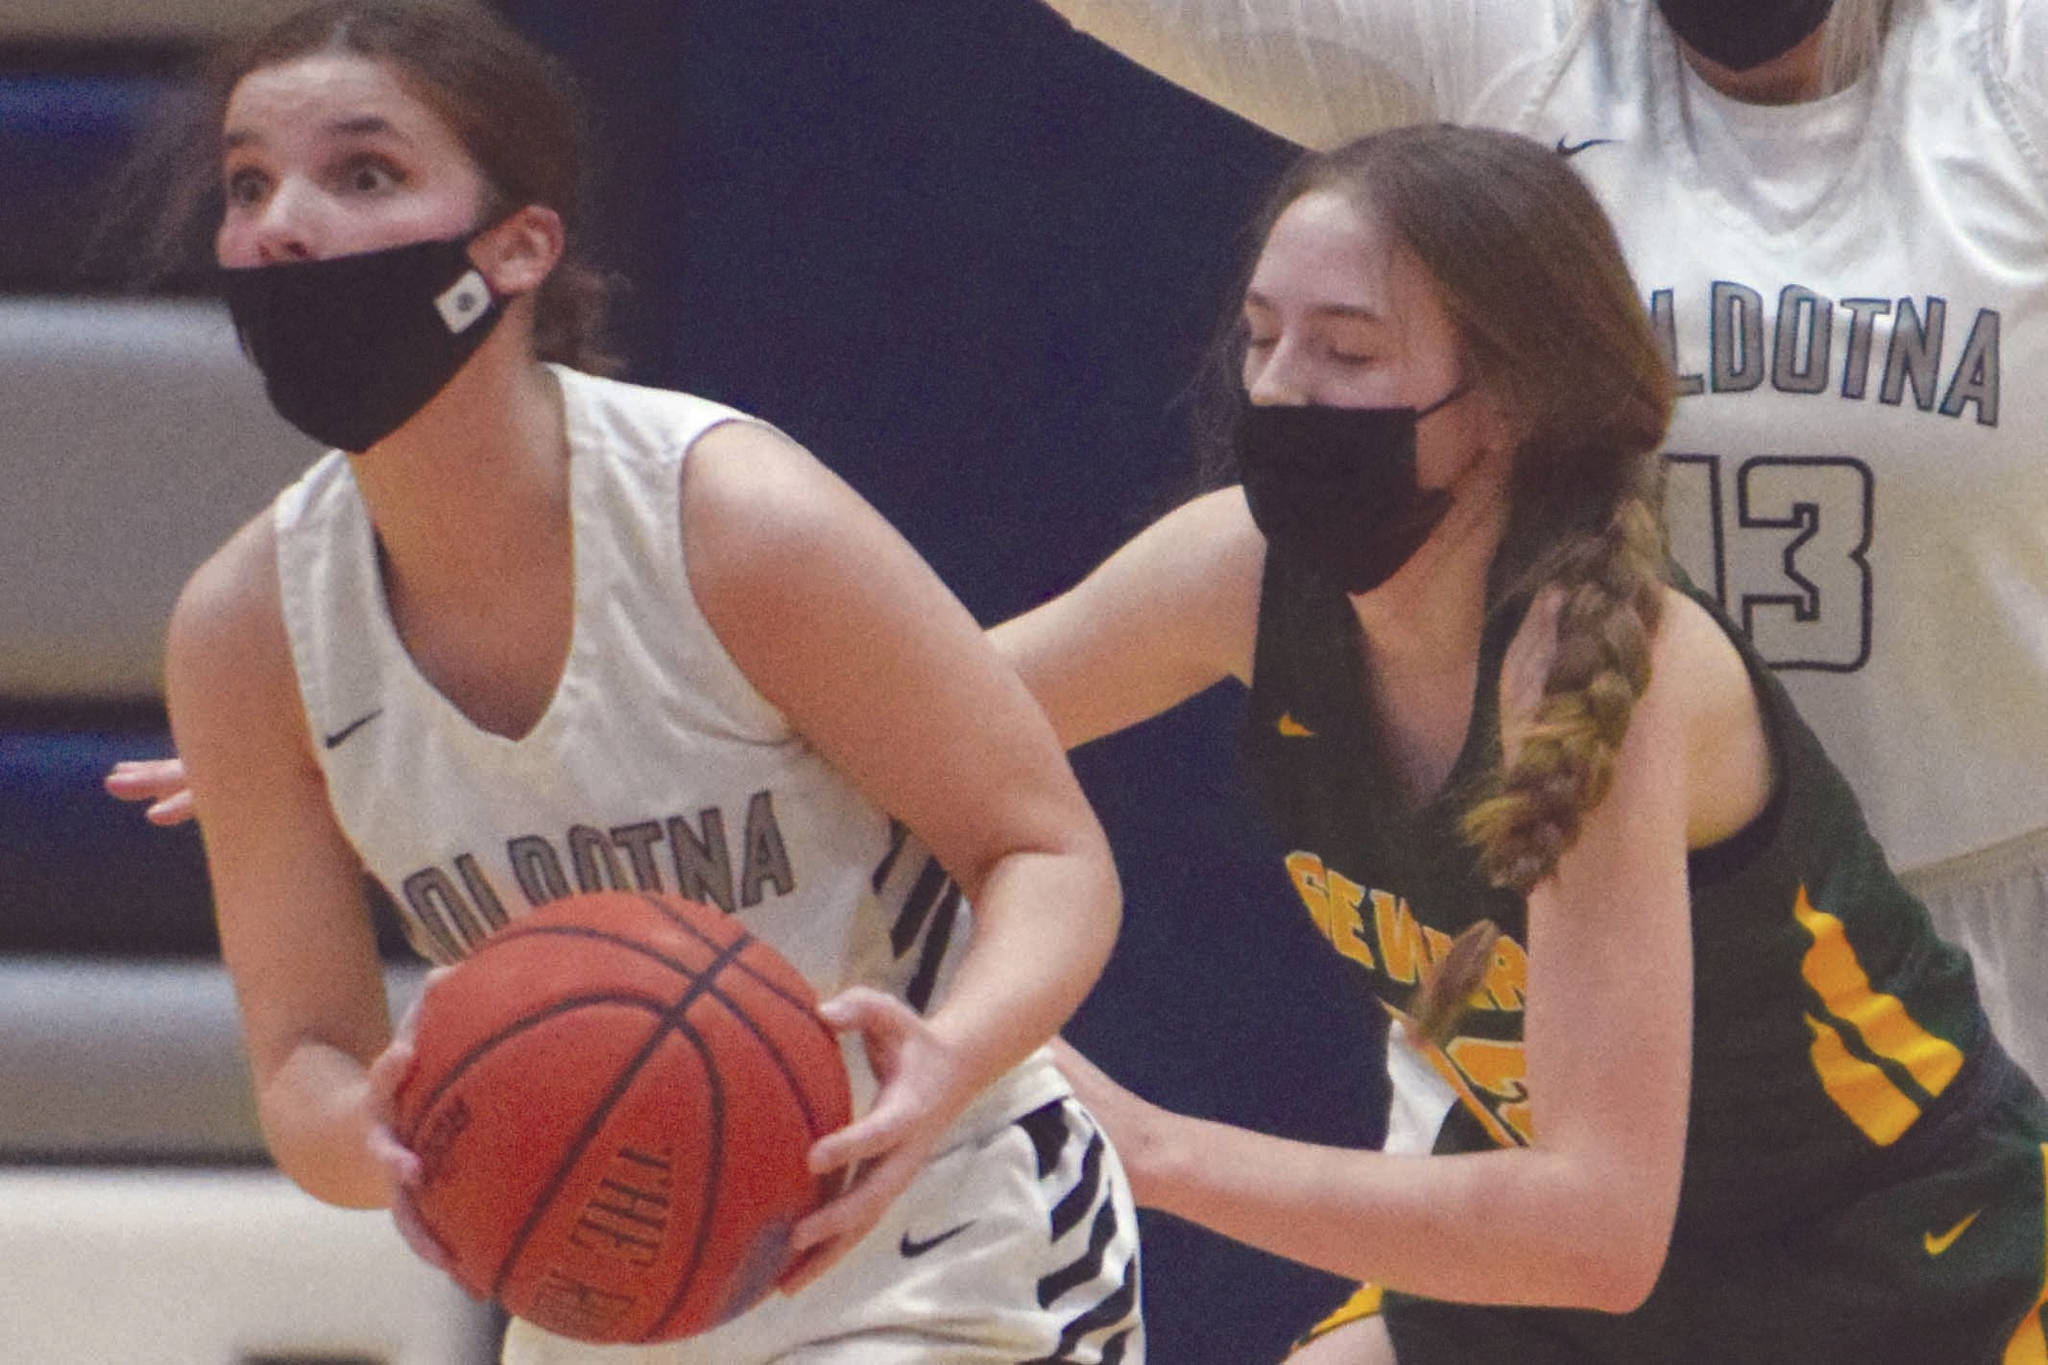 Soldotna’s Morgan Bouschor looks for an outlet pass under pressure from Seward’s Shelby Sieminski as Soldotna’s Taylor Edwards looks on at Soldotna High School on Tuesday, Feb. 23, 2021, in Soldotna, Alaska. (Photo by Jeff Helminiak/Peninsula Clarion)